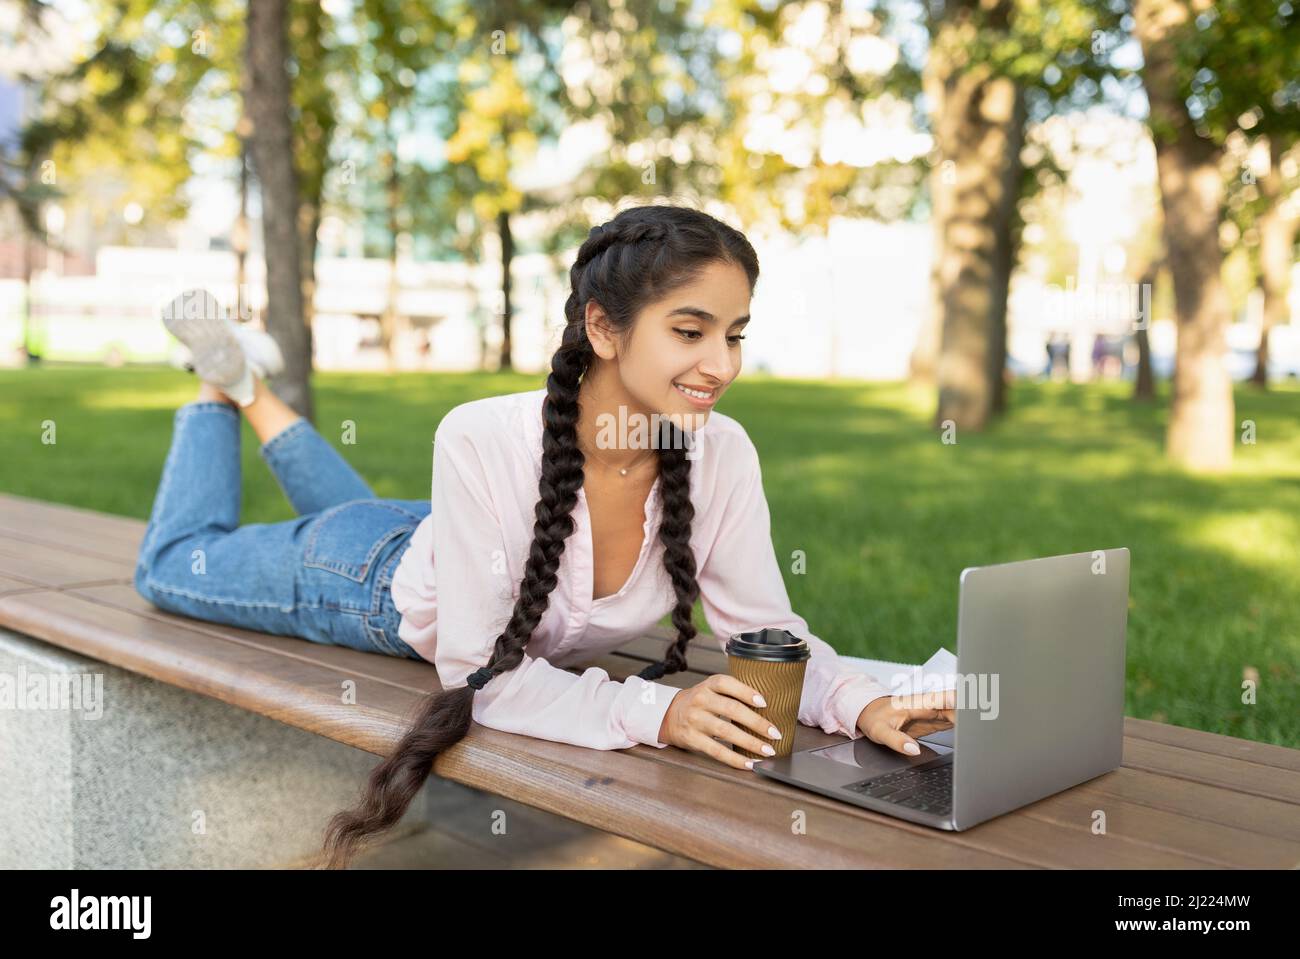 Rest at campus. Happy indian college student girl relaxing outdoors with coffee and laptop, lying on bench in park Stock Photo